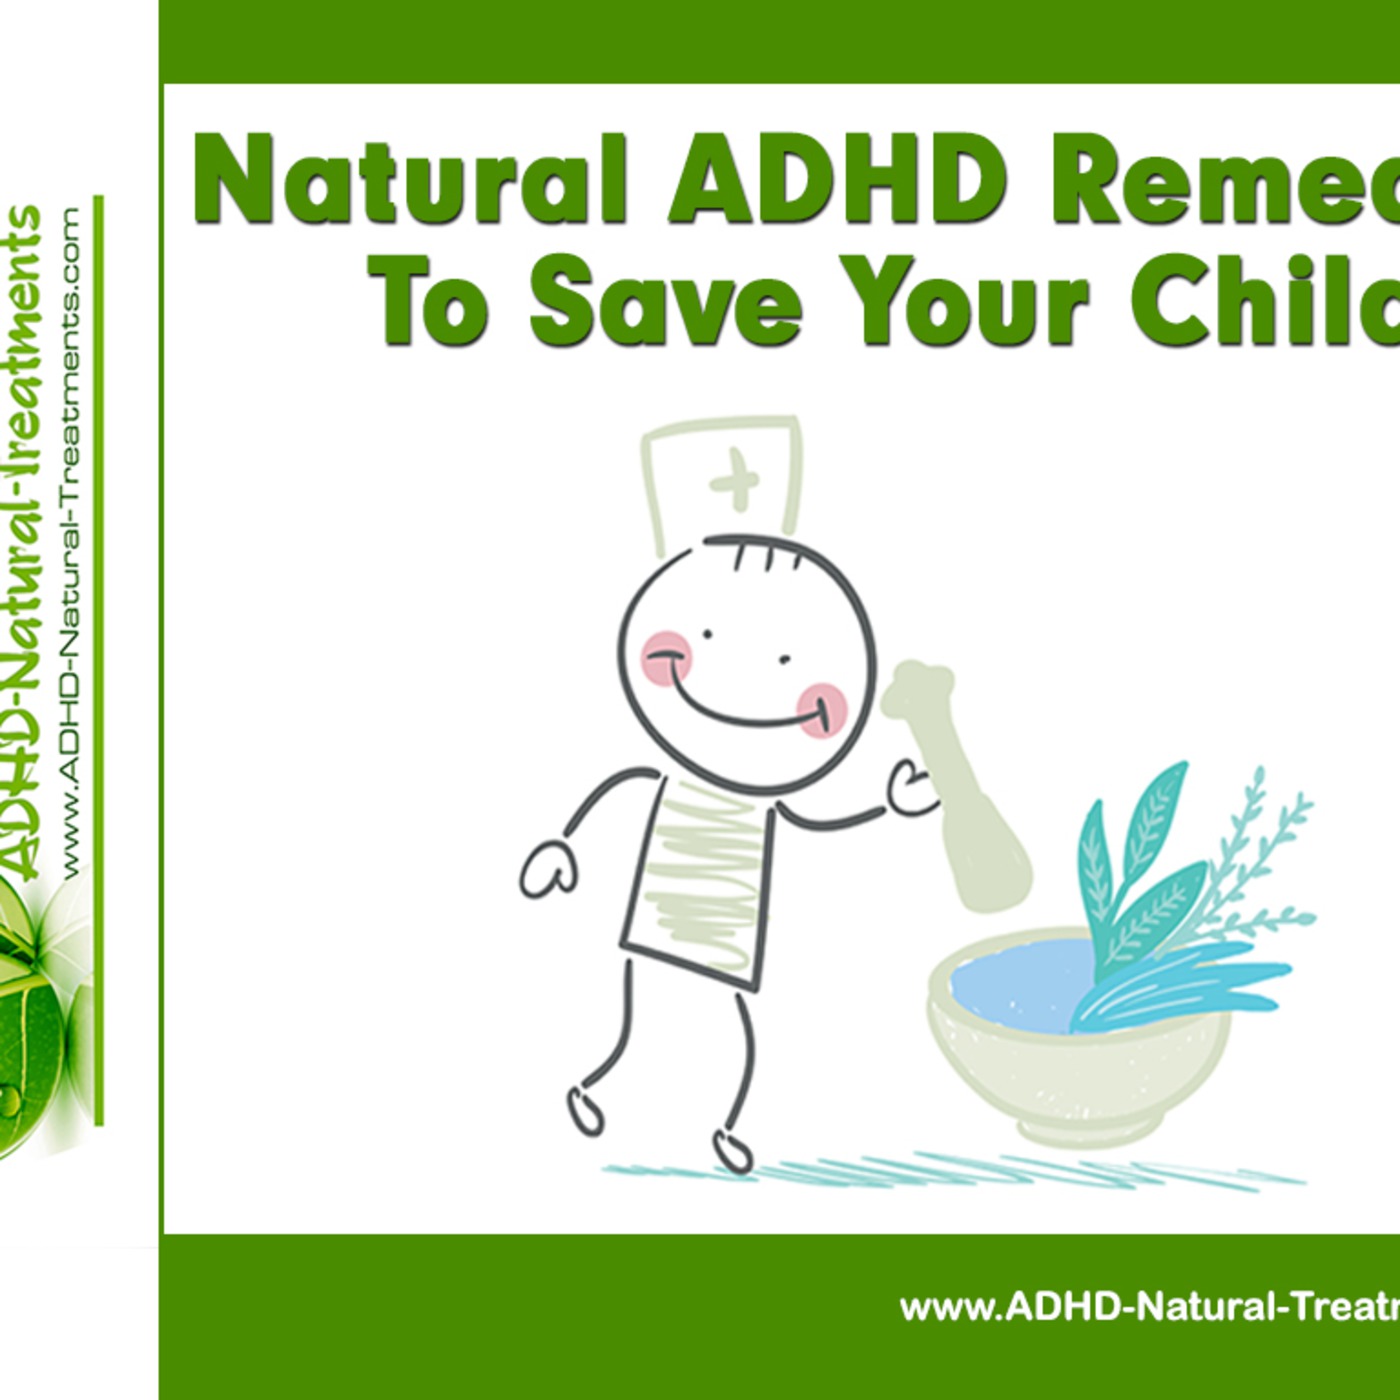 Natural ADHD Remedies - To Save Your Child